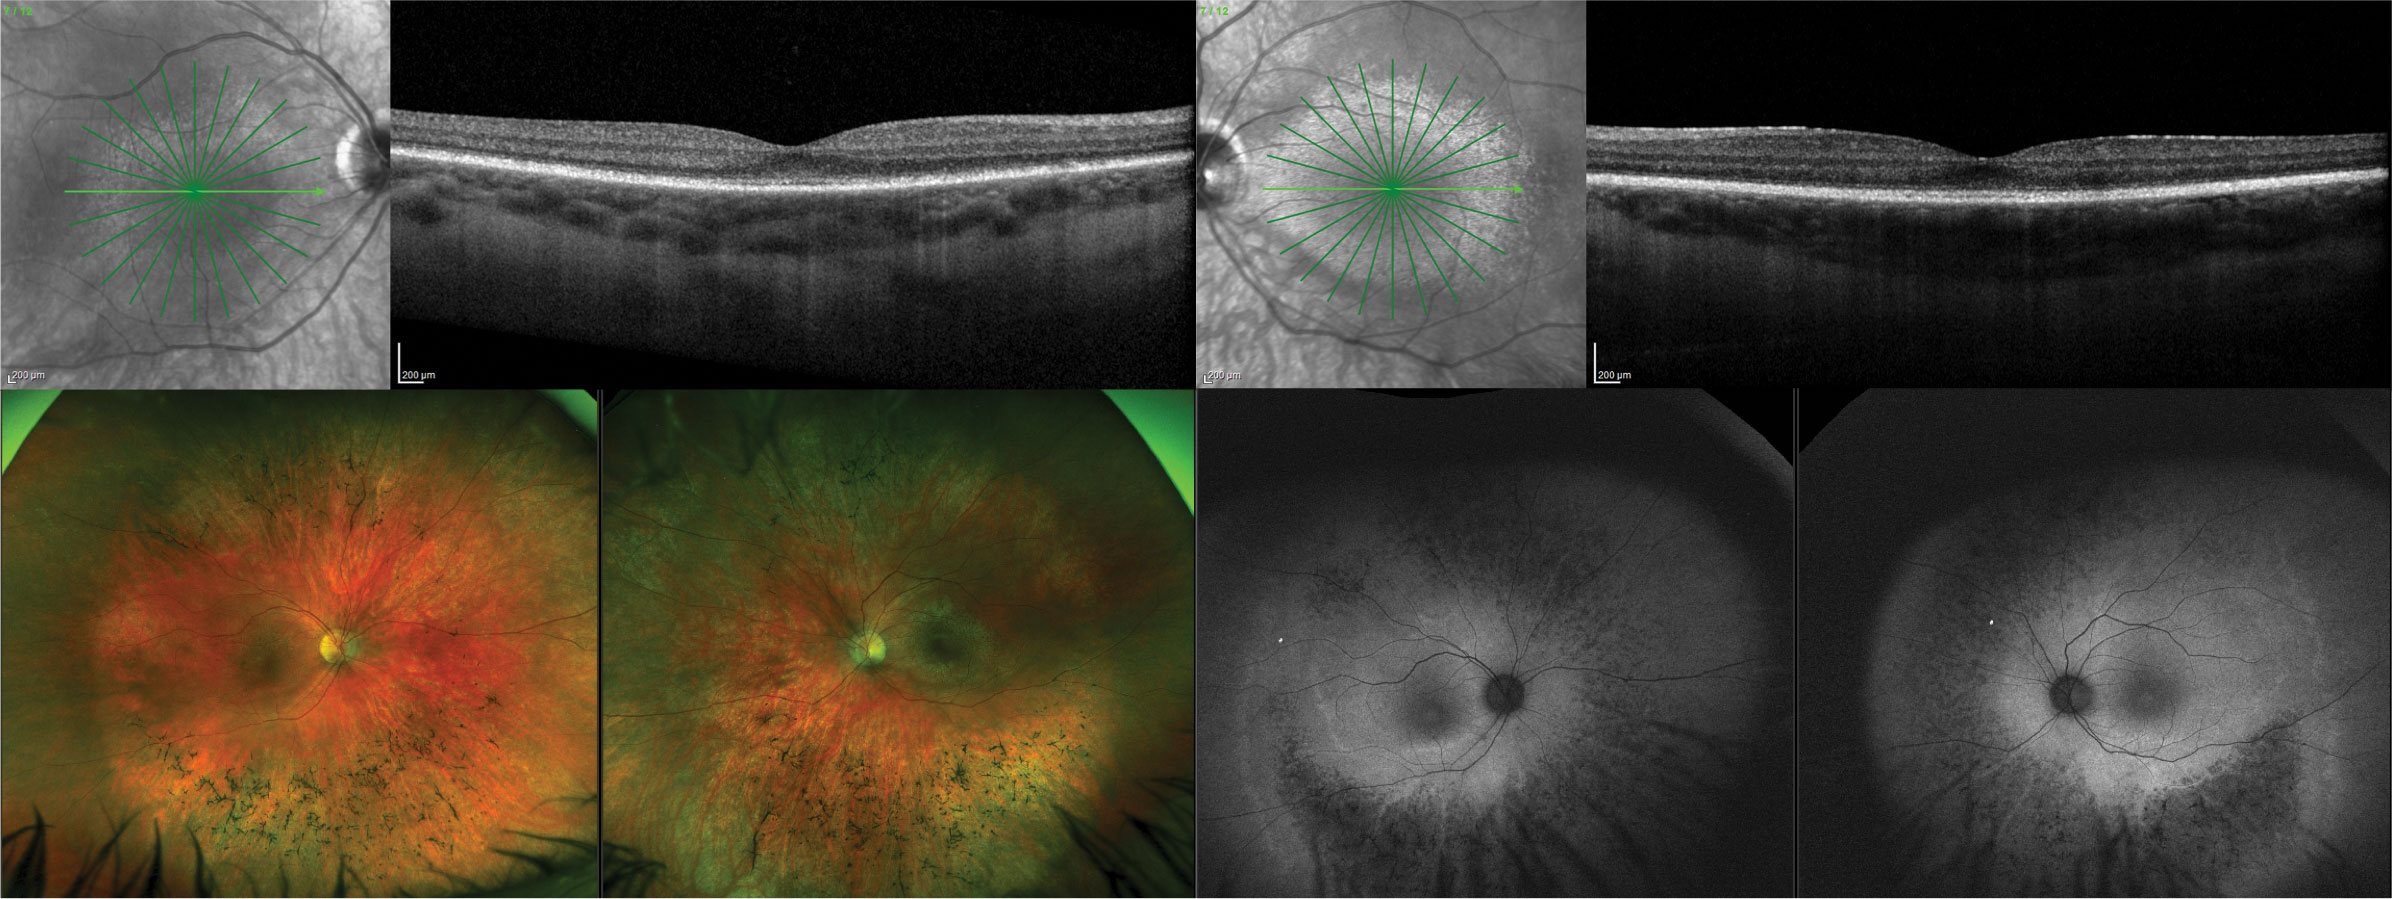 A 22-year-old white male presented with a homozygous pathogenic variant identified in TTLL5, consistent with cone rod dystrophy. OCT images show diffuse disruption of the photoreceptor integrity line. The macula has mild pigmentary alterations while the peripheral retina has a bone spicule-type appearance. FAF shows hypo-autofluorescence in the peripheral retina with hyper-autofluorescence centrally indicating both central (cone) and peripheral (rod) dysfunction.